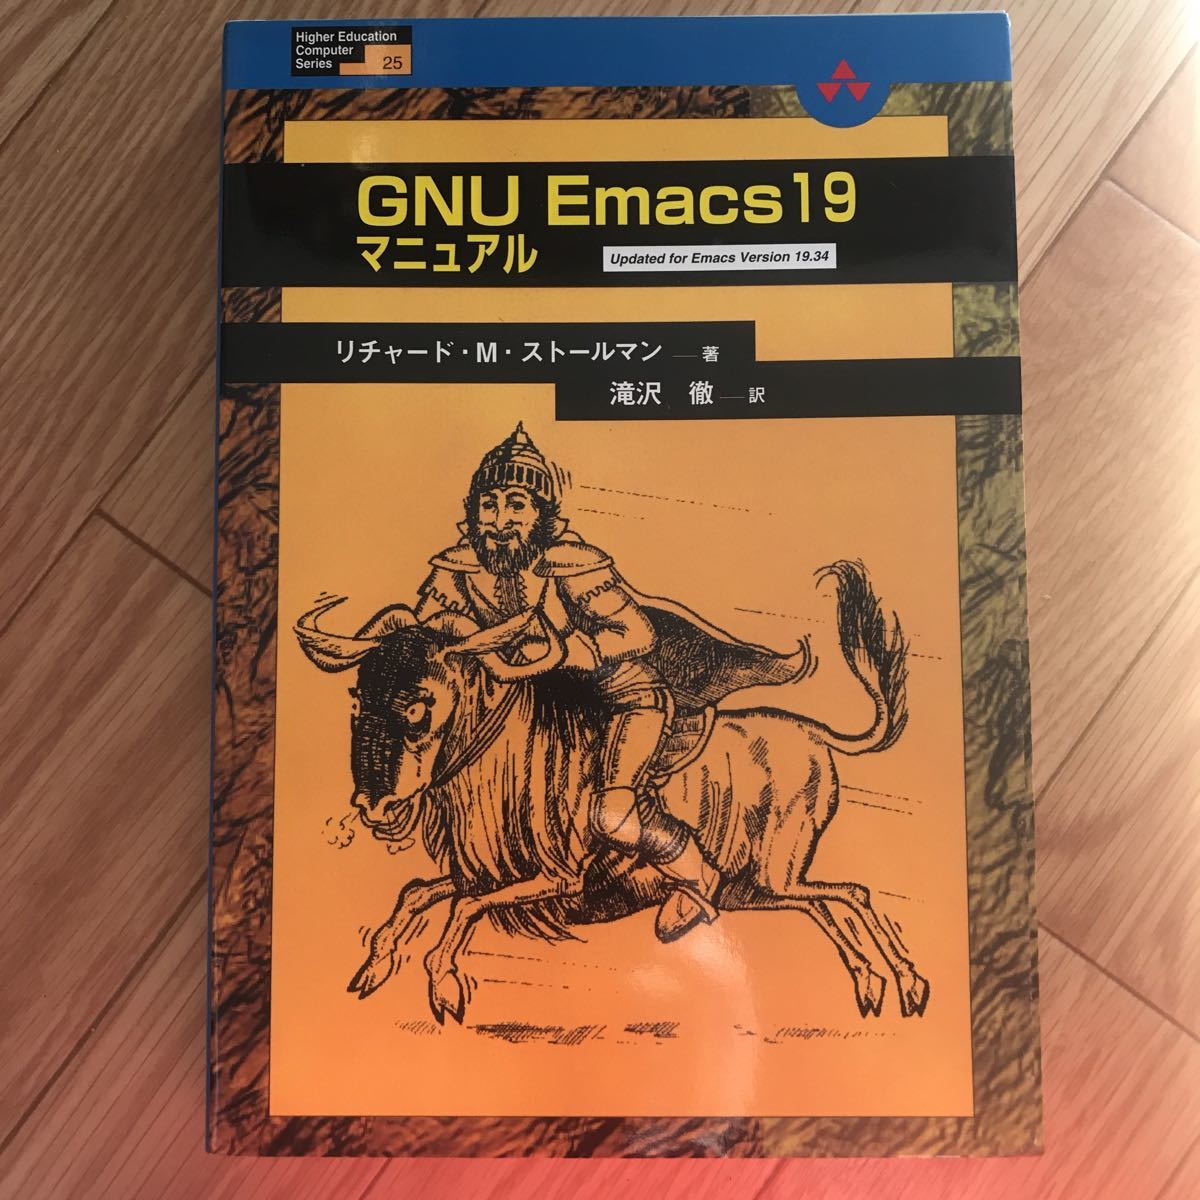 GNU Emacs 19 manual the first version no. 1. Richard *M* stole man work ... translation that 2